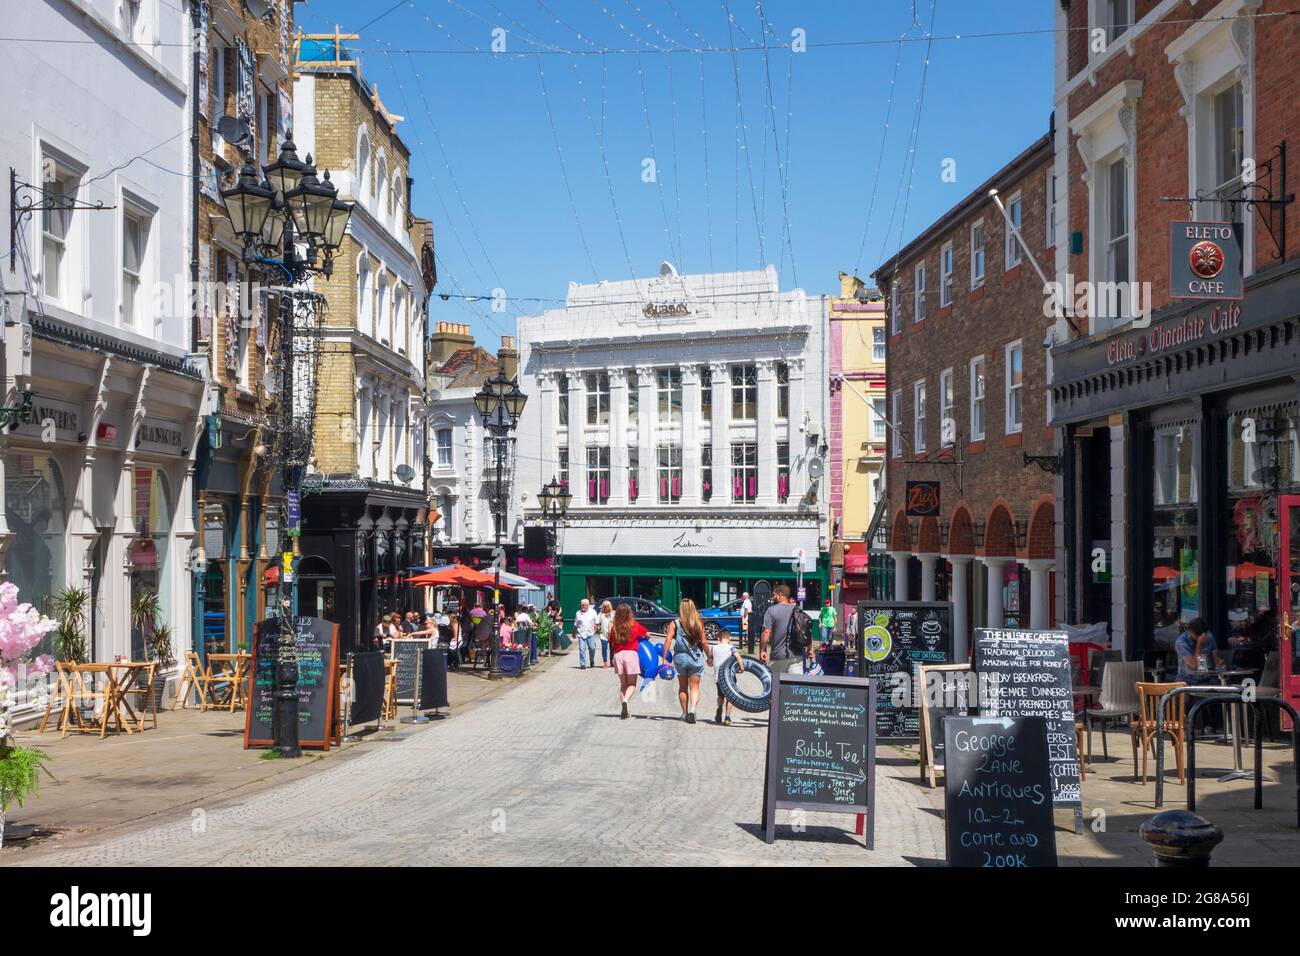 Folkestone, Kent, UK. Cafes along Rendezvous Street, in the Old Town Creative Quarter Stock Photo